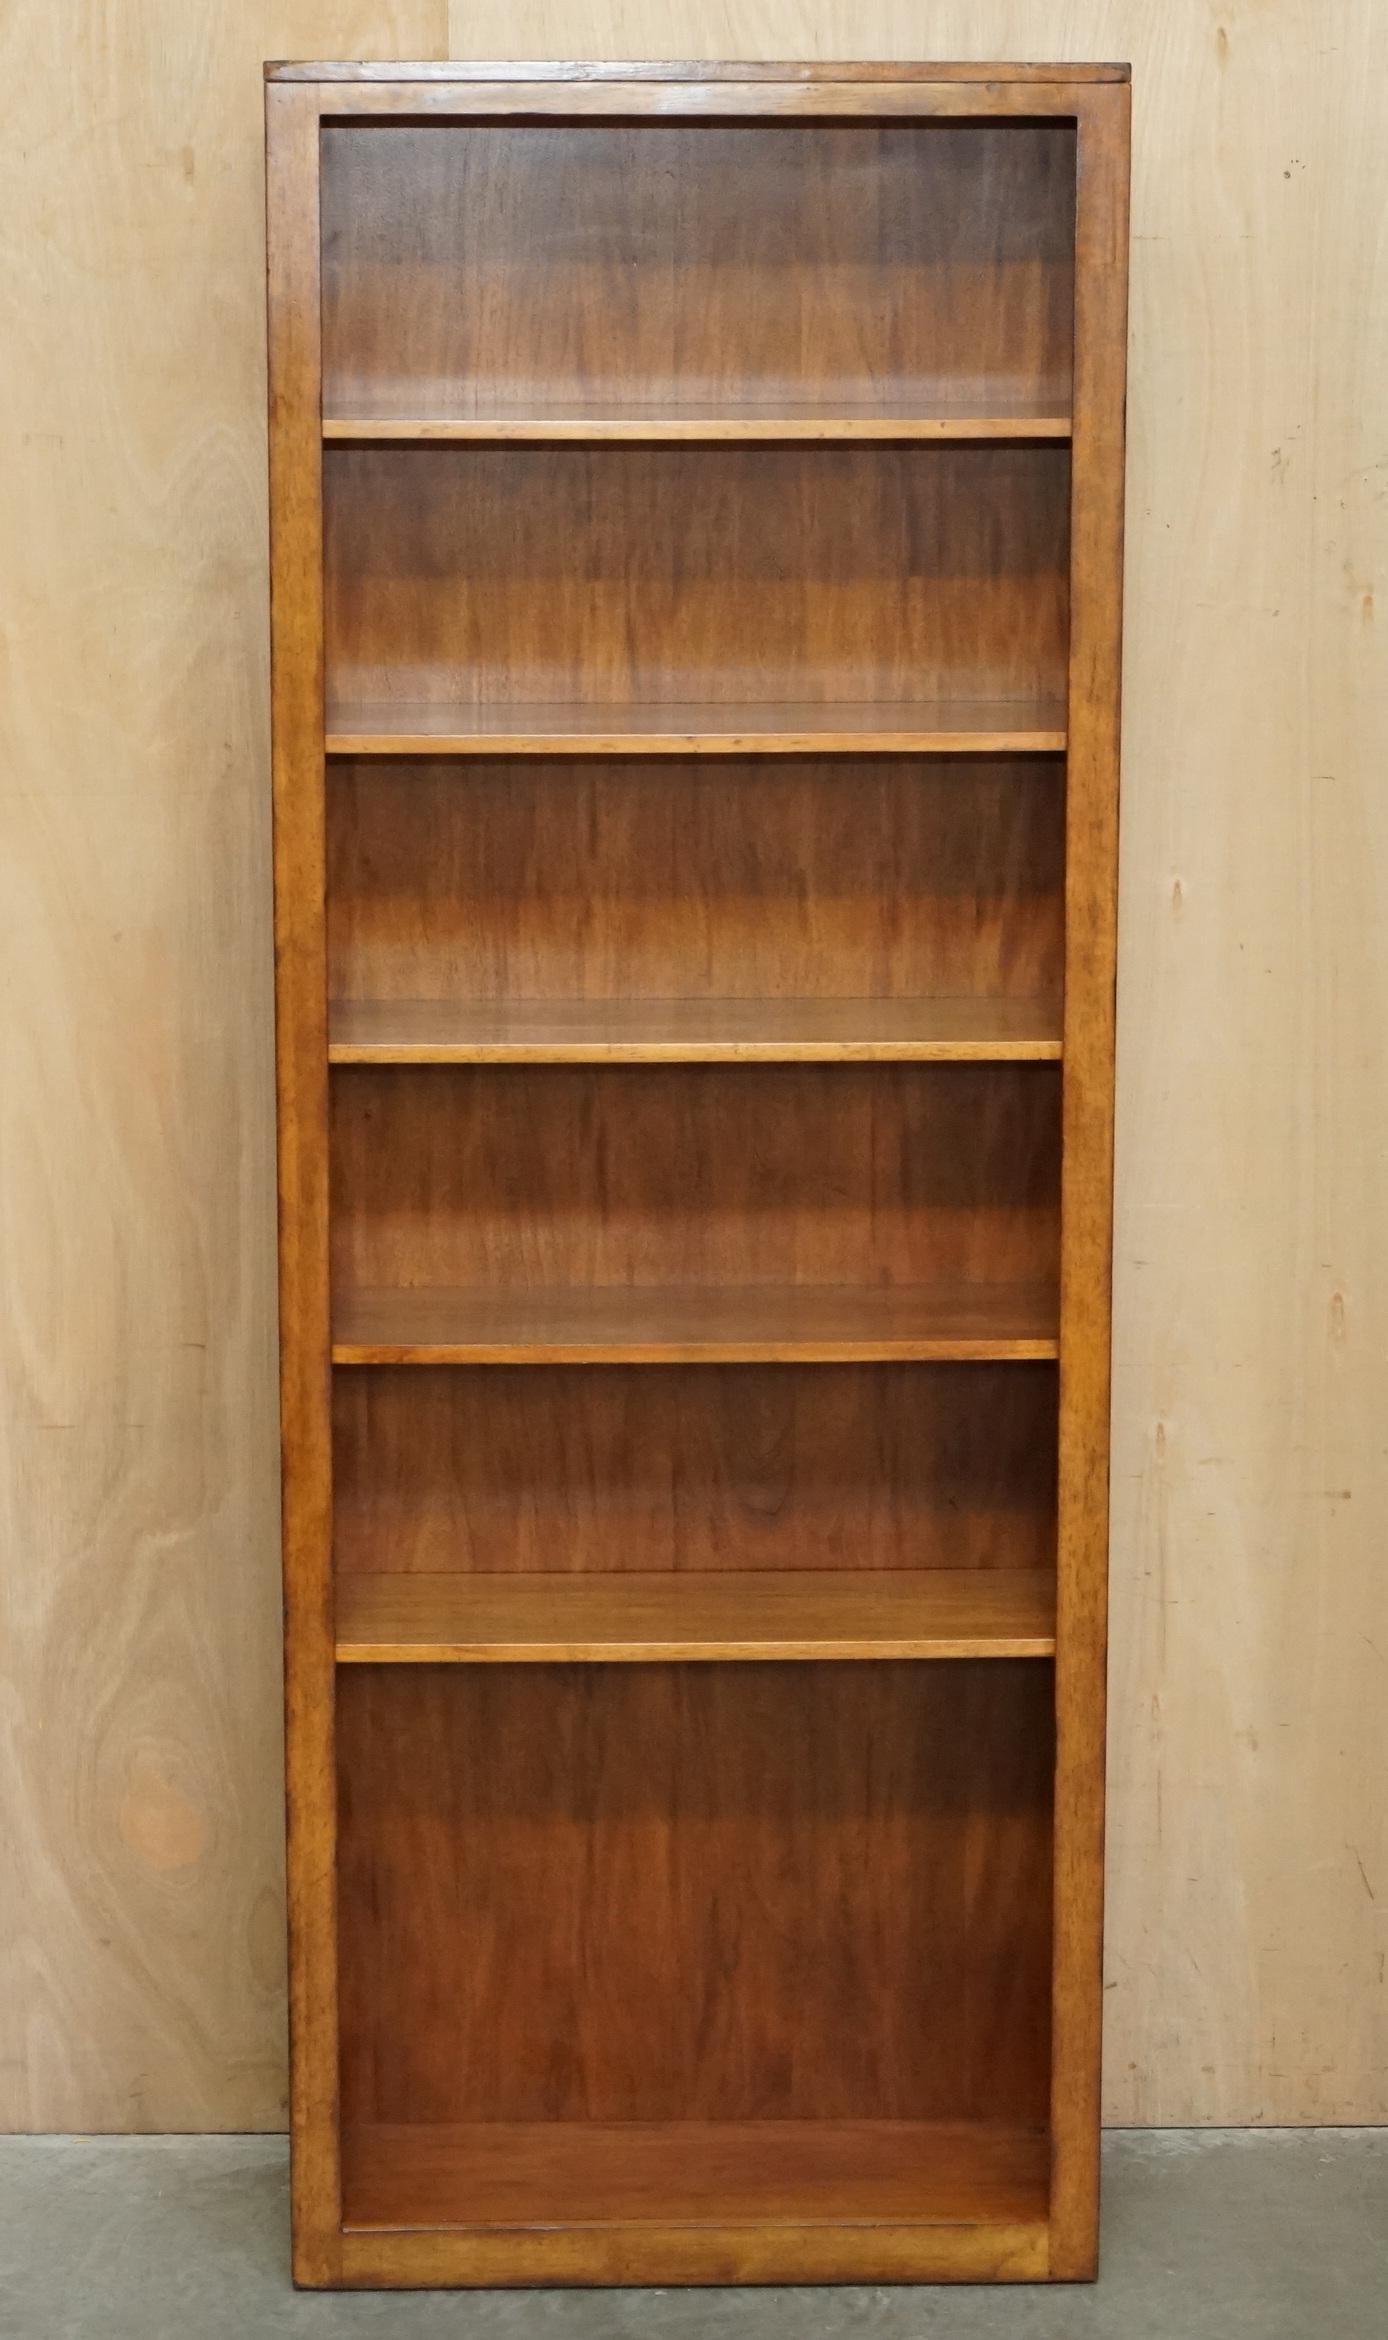 Mid-Century Modern PAIR OF HARDWOOD FINISH TALL OPEN LIBRARY BOOKCASES BY THE DESiGNER ETHAN ALLEN